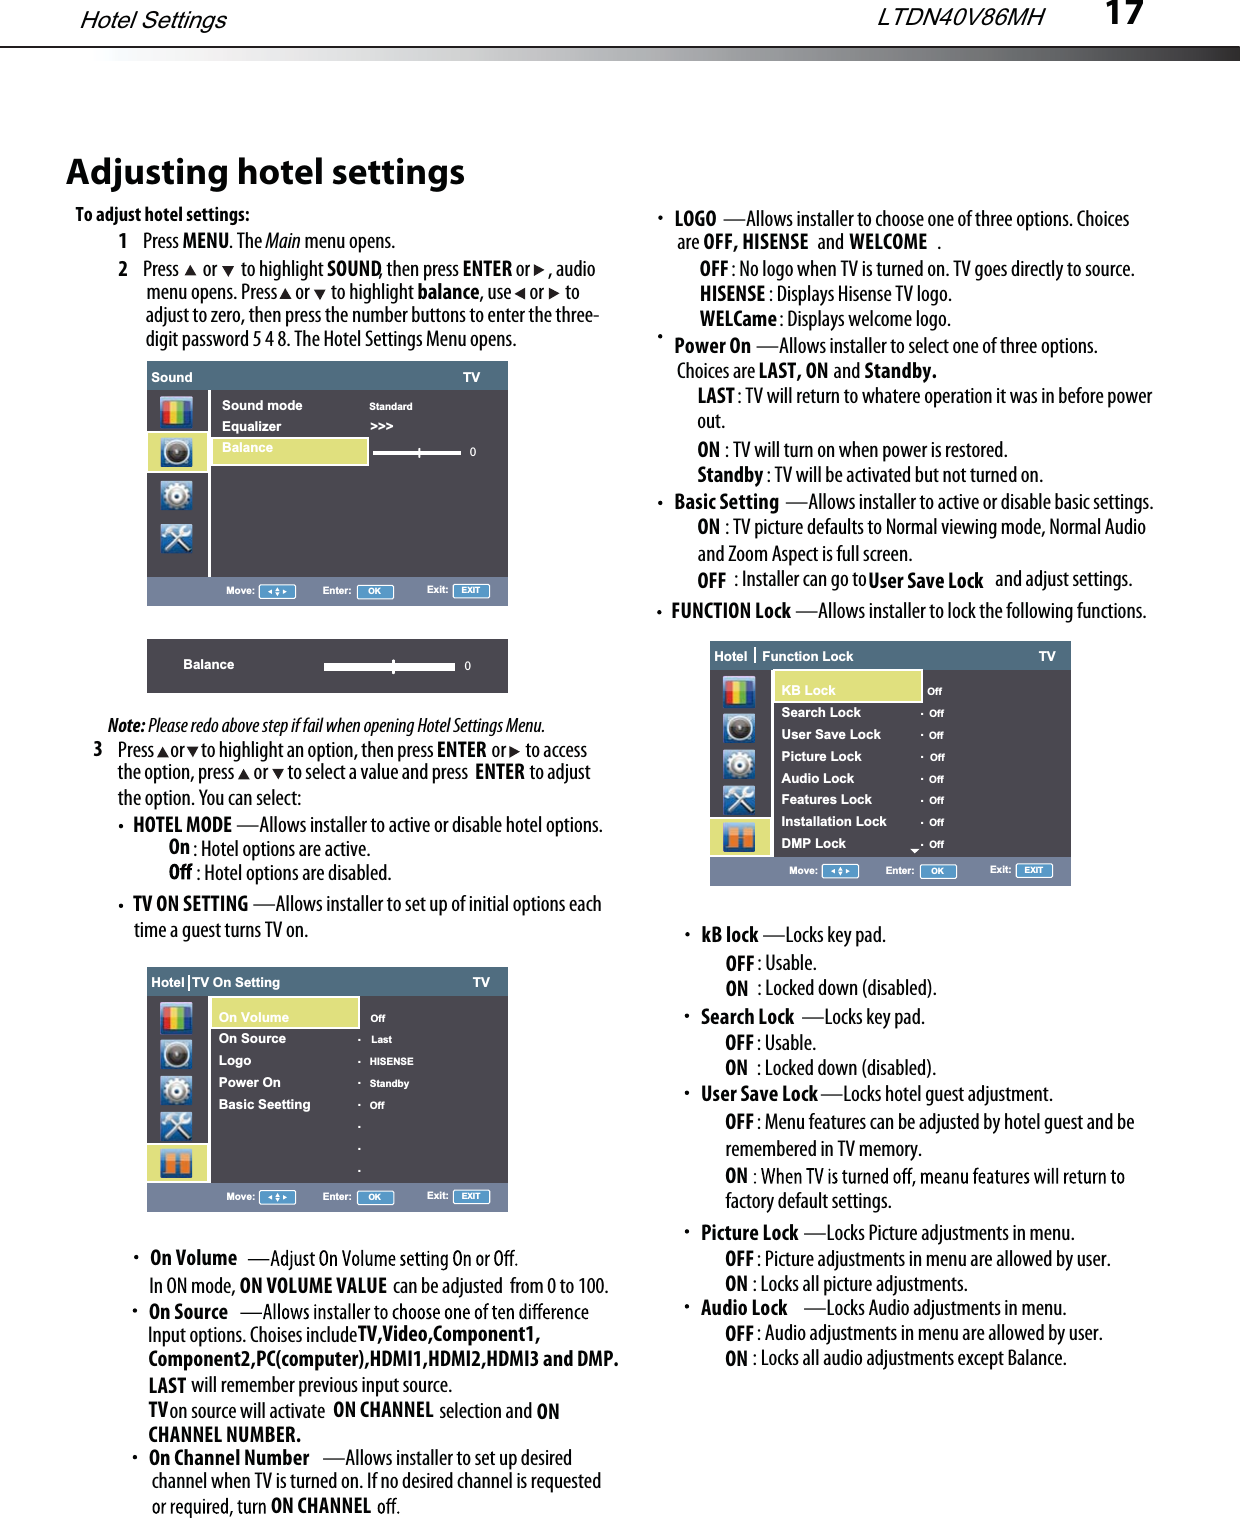 17Adjusting hotel settingsTo adjust hotel settings:1Press MENU. The Main menu opens.2Press   or   to highlight SOUND, then press ENTER or     , audio3HOTEL MODE —Allows installer to active or disable hotel options. TV ON SETTING —Allows installer to set up of initial options eachPress     or     to highlight an option, then press                  or      to accessthe option, press      or      to select a value and press                   to adjustthe option. You can select:ENTER menu opens. Press     or      to highlight balance, use     or      to  adjust to zero, then press the number buttons to enter the three- digit password 5 4 8. The Hotel Settings Menu opens.Note: Please redo above step if fail when opening Hotel Settings Menu.ENTER: Hotel options are active. On: Hotel options are disabled. time a guest turns TV on.On VolumeIn ON mode,                                            can be adjusted  from 0 to 100.ON VOLUME VALUEOn SourceInput options. Choises include will remember previous input source.LASTTV,Video,Component1,on source will activate                                selection andTV                                              ON CHANNEL                             ON CHANNEL NUMBER.—Allows installer to set up desiredOn Channel Numberchannel when TV is turned on. If no desired channel is requestedON CHANNEL—Allows installer to select one of three options.Power OnChoices are                      andLAST, ON          Standby.: TV will return to whatere operation it was in before powerLAST out.ON : TV will turn on when power is restored.Standby : TV will be activated but not turned on.—Allows installer to active or disable basic settings.Basic SettingON : TV picture defaults to Normal viewing mode, Normal Audio OFF : Installer can go to                                    and adjust settings.and Zoom Aspect is full screen.User Save LockFUNCTION Lock —Allows installer to lock the following functions.—Locks key pad.kB lockOFF: Usable.ON : Locked down (disabled).—Locks key pad.Search Lock OFF: Usable.ON : Locked down (disabled).—Locks hotel guest adjustment.User Save Lock OFF: Menu features can be adjusted by hotel guest and be ONremembered in TV memory.factory default settings.LTDN40V86MHHotel SettingsSound                                                                         TV0Move: Enter:      OK Exit:     EXITSound mode                  StandardEqualizer                        &gt;&gt;&gt;BalanceBalance 0Hotel  TV On Setting                                                    TVMove: Enter:      OK Exit:     EXITOn Volume                      OffOn Source                       LastLogo                                HISENSEPower On                        StandbyBasic Seetting                Off.......Hotel    Function Lock                                                  TVMove: Enter:      OK Exit:     EXIT                                          OffSearch Lock                   OffUser Save Lock             OffPicture Lock                   OffAudio Lock                     OffFeatures Lock                OffInstallation Lock            OffDMP Lock                       Off.......Hotel    Function Lock                                                  TVMove: Enter:      OK Exit:     EXITKB Lock                           OffSearch Lock                   OffUser Save Lock             OffPicture Lock                   OffAudio Lock                     OffFeatures Lock                OffInstallation Lock            OffDMP Lock                       Off.......—Locks Picture adjustments in menu.Picture LockOFF: Picture adjustments in menu are allowed by user.ON : Locks all picture adjustments.—Locks Audio adjustments in menu.Audio LockOFF: Audio adjustments in menu are allowed by user.ON : Locks all audio adjustments except Balance.—Allows installer to choose one of three options. ChoicesLOGOare                                 and                          .: No logo when TV is turned on. TV goes directly to source.OFF: Displays Hisense TV logo.HISENSE: Displays welcome logo.WELCameOFF, HISENSE WELCOMEComponent2,PC(computer),HDMI1,HDMI2,HDMI3 and DMP.